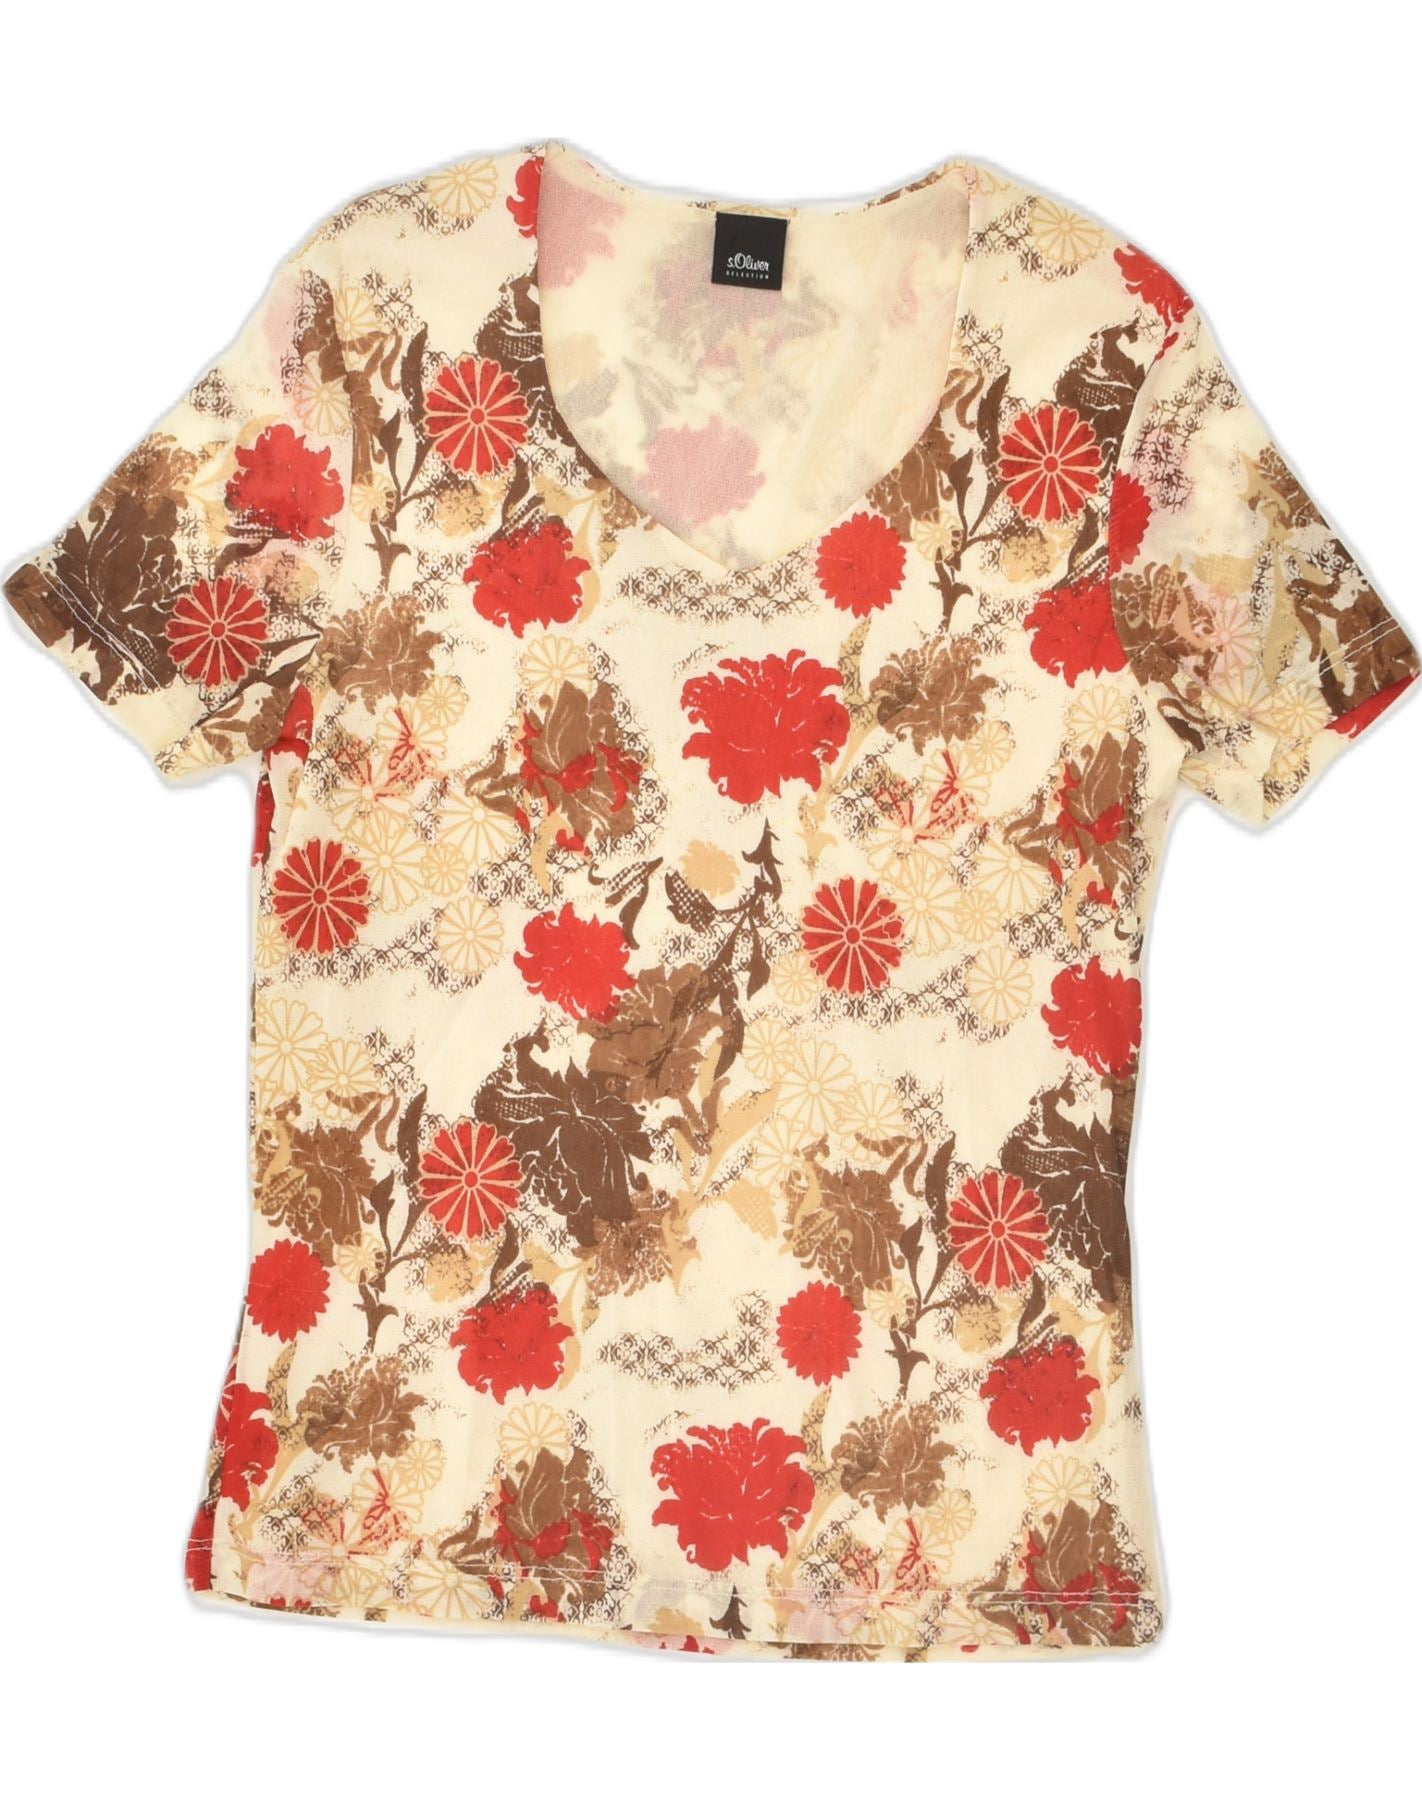 Second-Hand Womens Polyamide 10 Online Thrift Clothing S.OLIVER & | Beige Shop Small Vintage Top T-Shirt | UK Floral